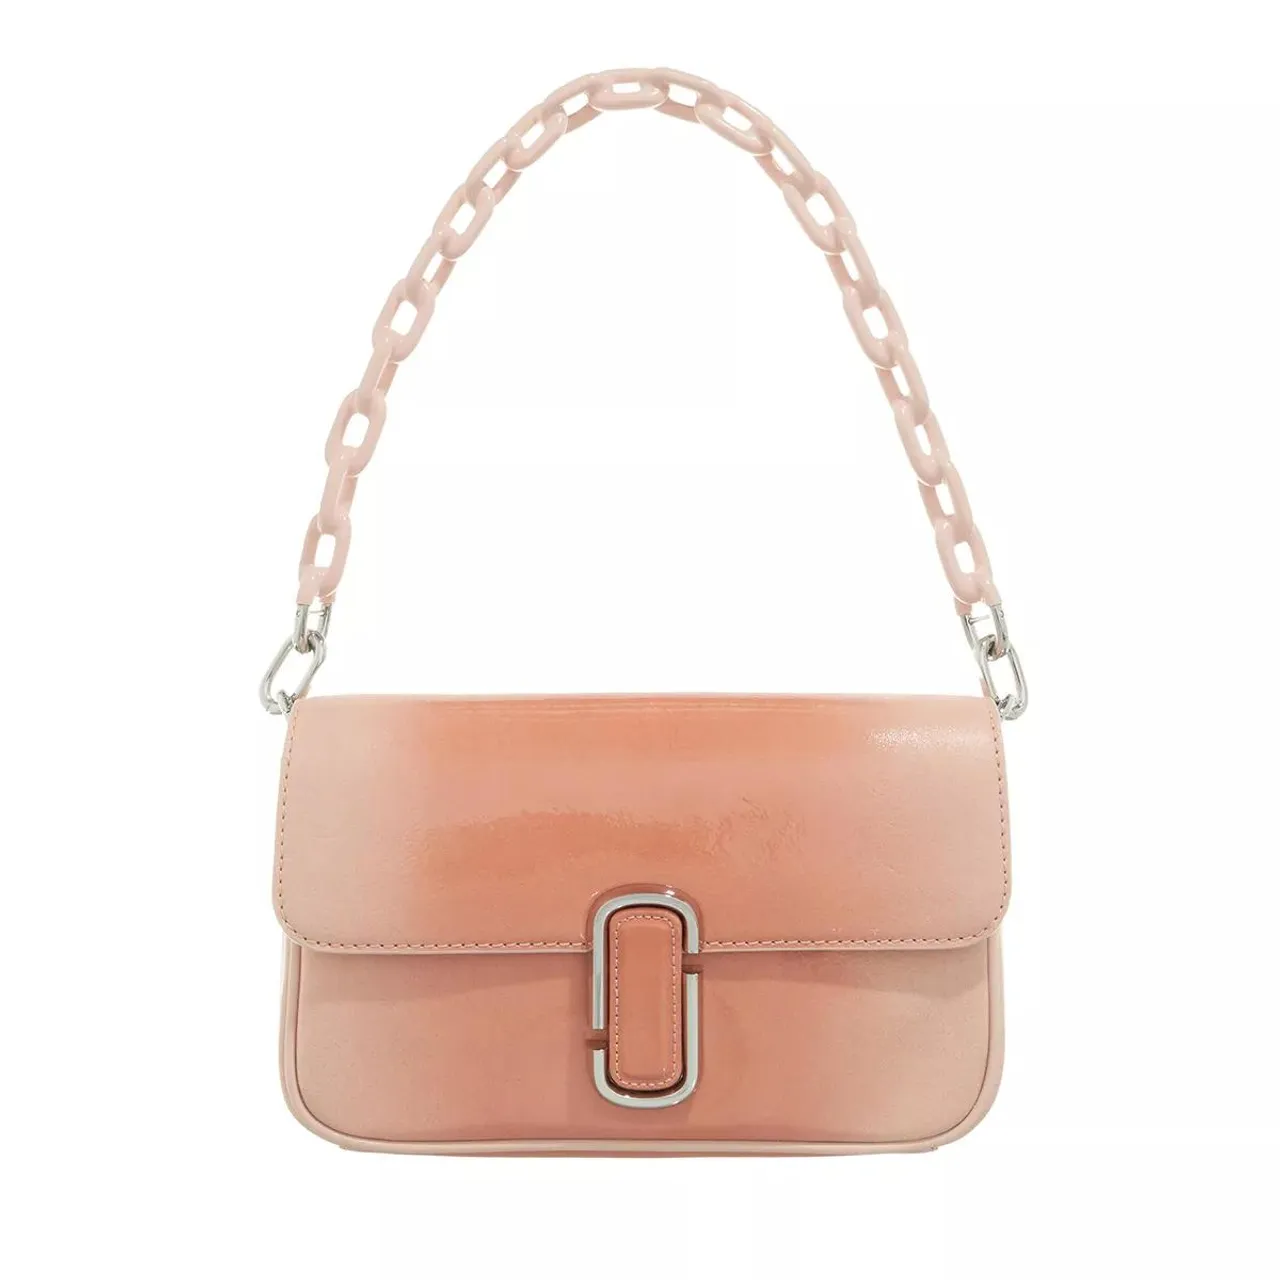 Marc Jacobs Satchels - The Shadow Patent Leather Bag - coral - Satchels for ladies